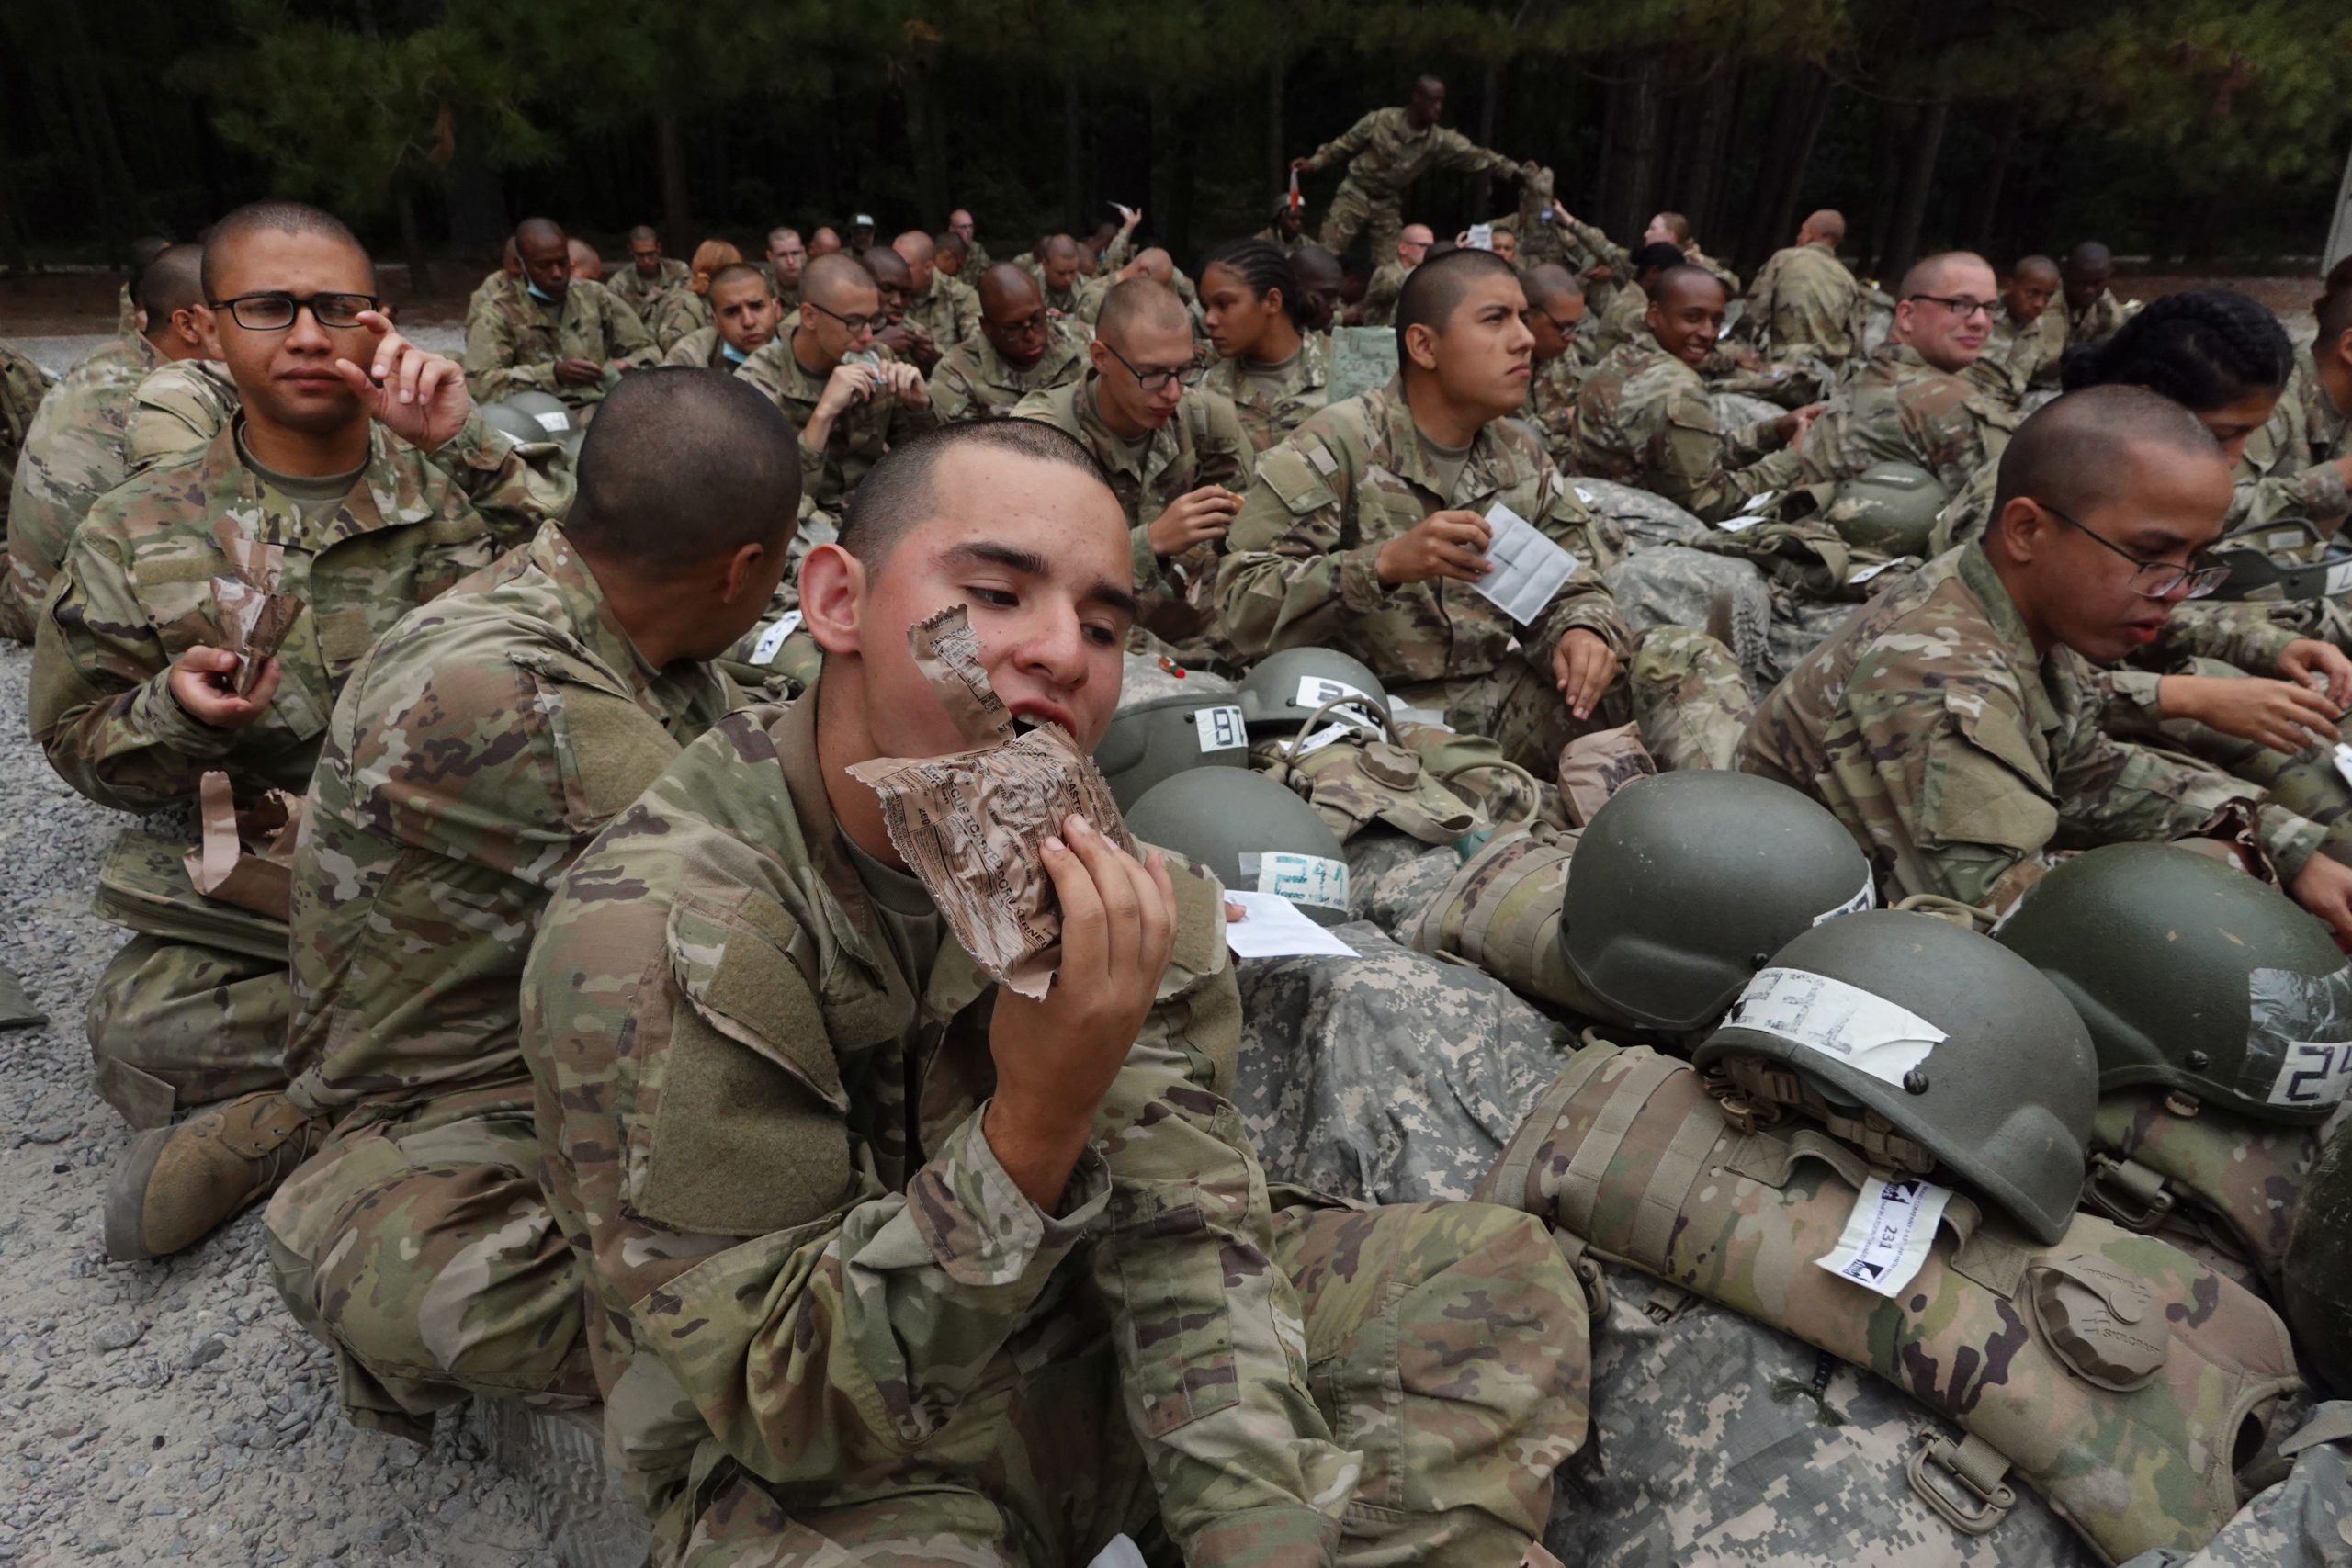 COLUMBIA, SOUTH CAROLINA - SEPTEMBER 29: U.S. Army trainees eat lunch in the field while going through basic training at Fort Jackson on September 29, 2022 in Columbia, South Carolina. Fort Jackson, the largest of the Army's four basic training facilities, trains 60 percent of the Army's new recruits. This past year, the Army has struggled to meet its recruiting goals, falling short by about 15,000 recruits or about 25 percent of its goal as it closed the fiscal year. 